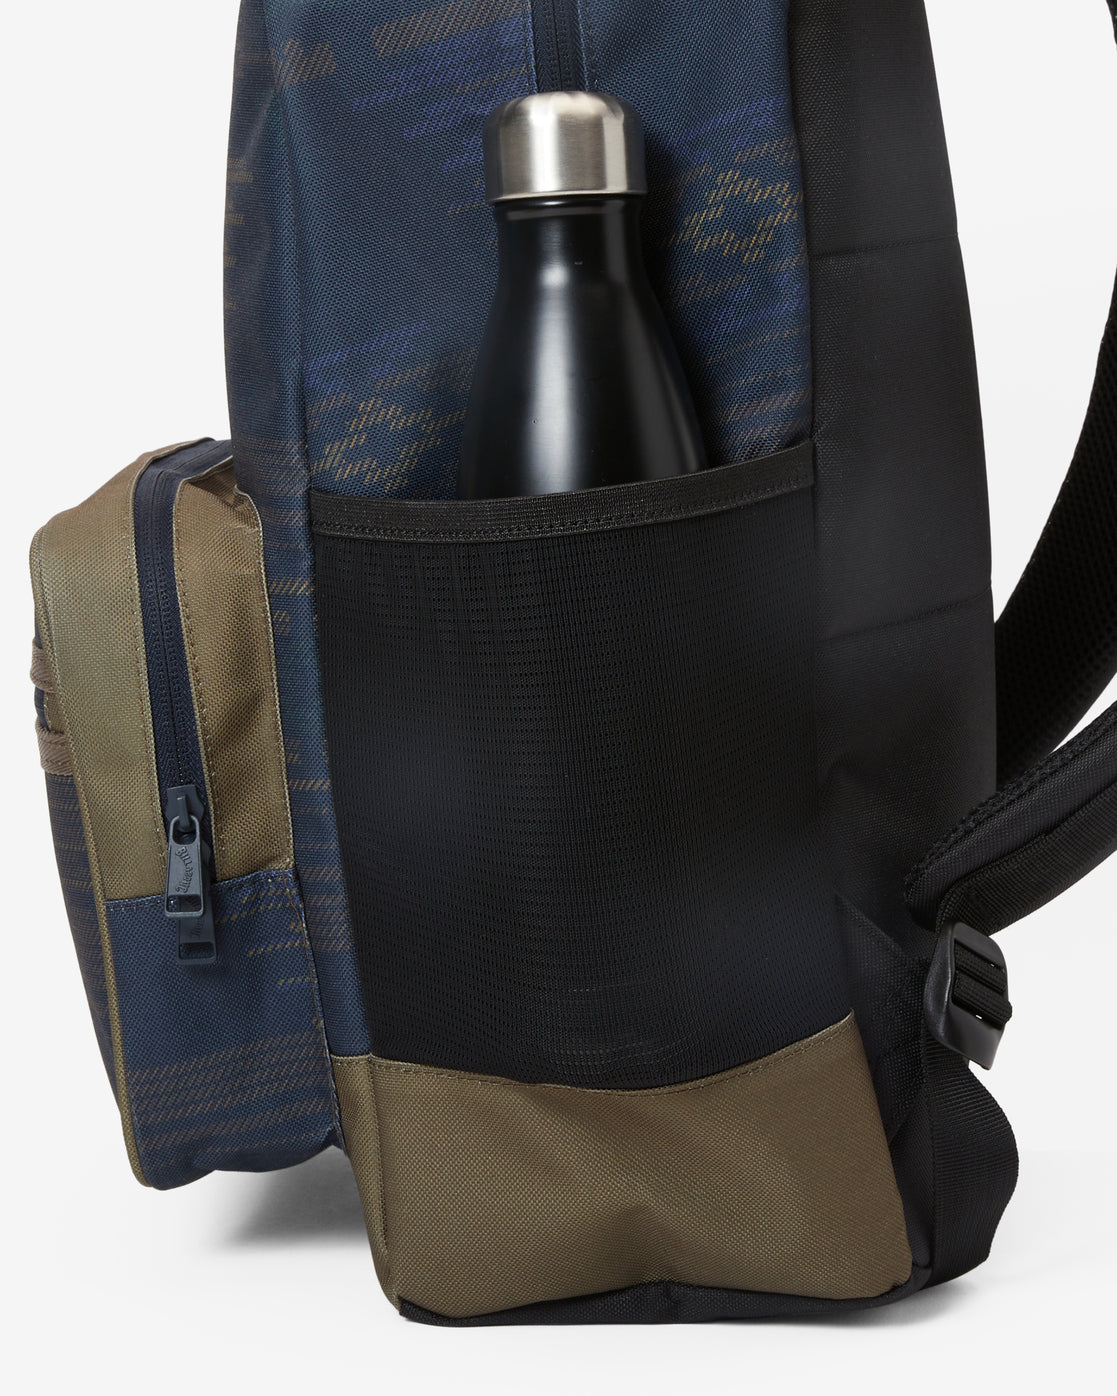 Billabong All Day Plus 22L Backpack in Dark Navy